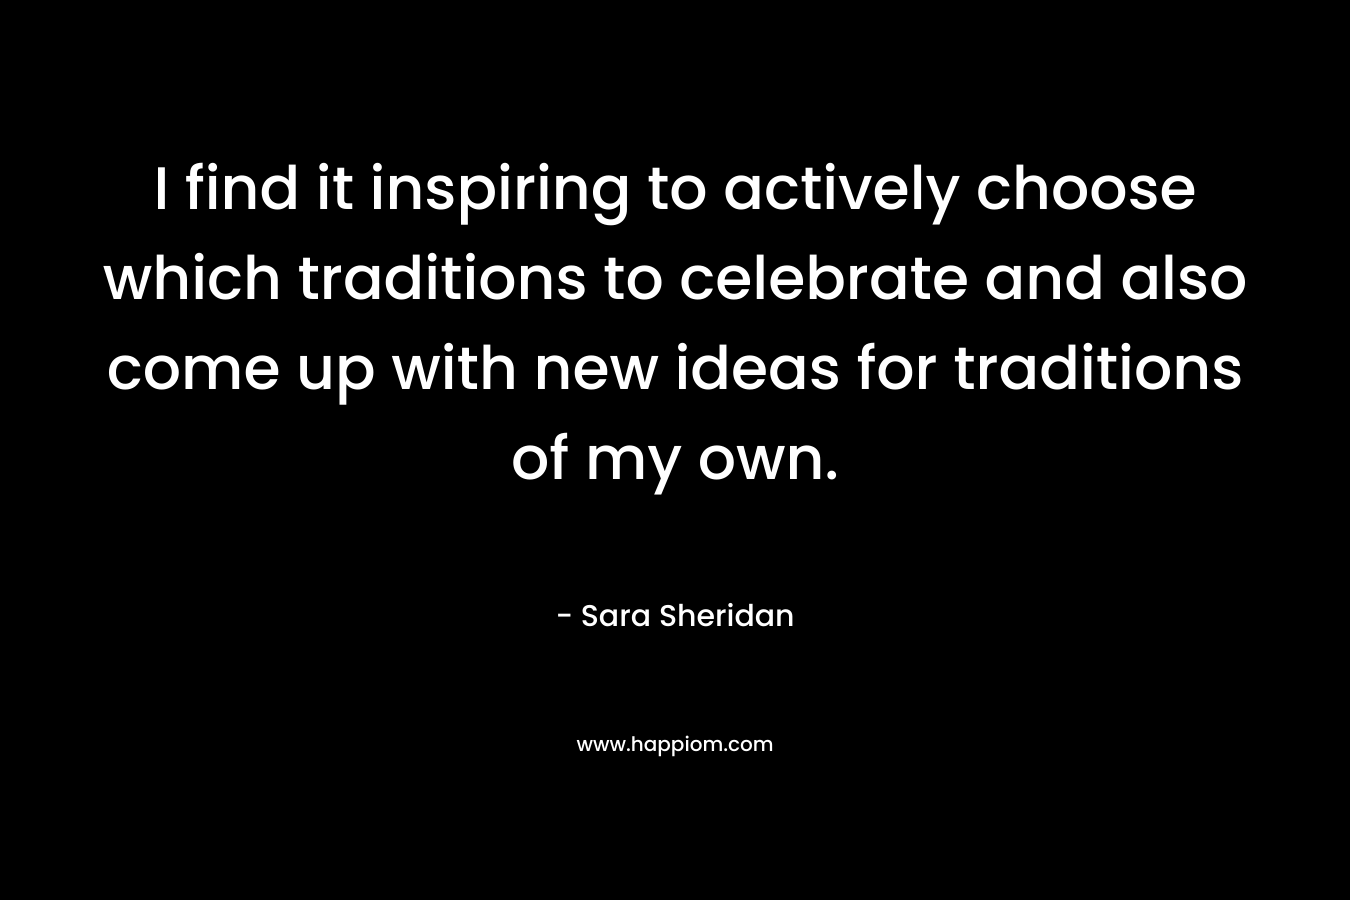 I find it inspiring to actively choose which traditions to celebrate and also come up with new ideas for traditions of my own. – Sara Sheridan